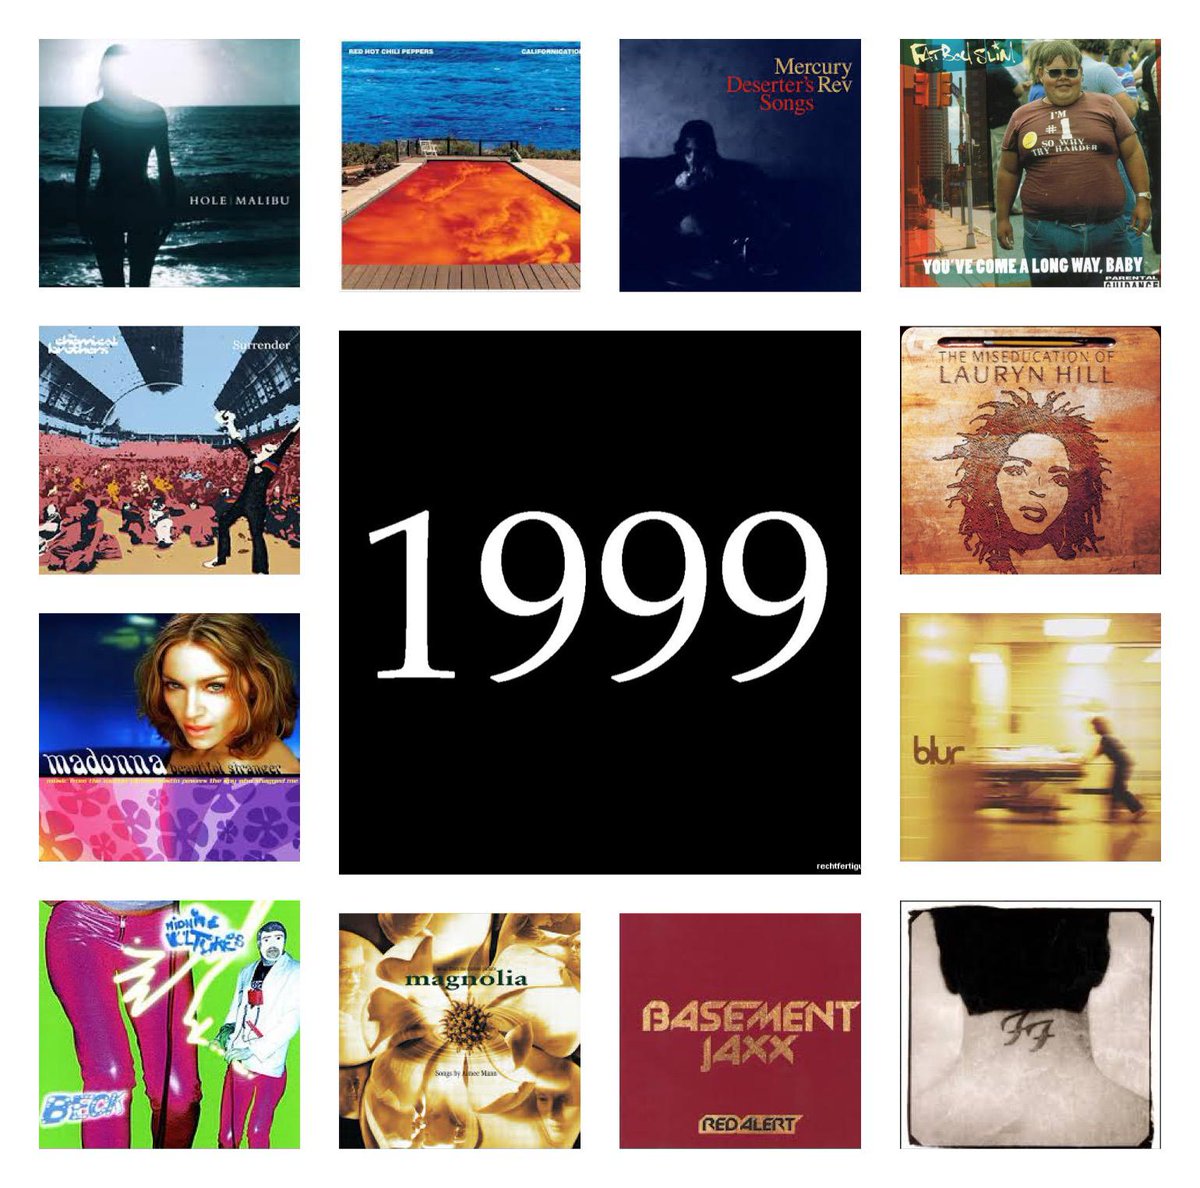 It's 1999 on tonight's Roadhouse Cafe. 25 years! A brilliant mix of gems like The Red Hot Chillis Scar Tissue, Blur’s Bettlebum, Lauryn Hill’s Ex Factor. Plus - Irish debut albums from @NewDad_ and @ConchurWhite Tune in from 10pm midlands103.com #1999 #newirish